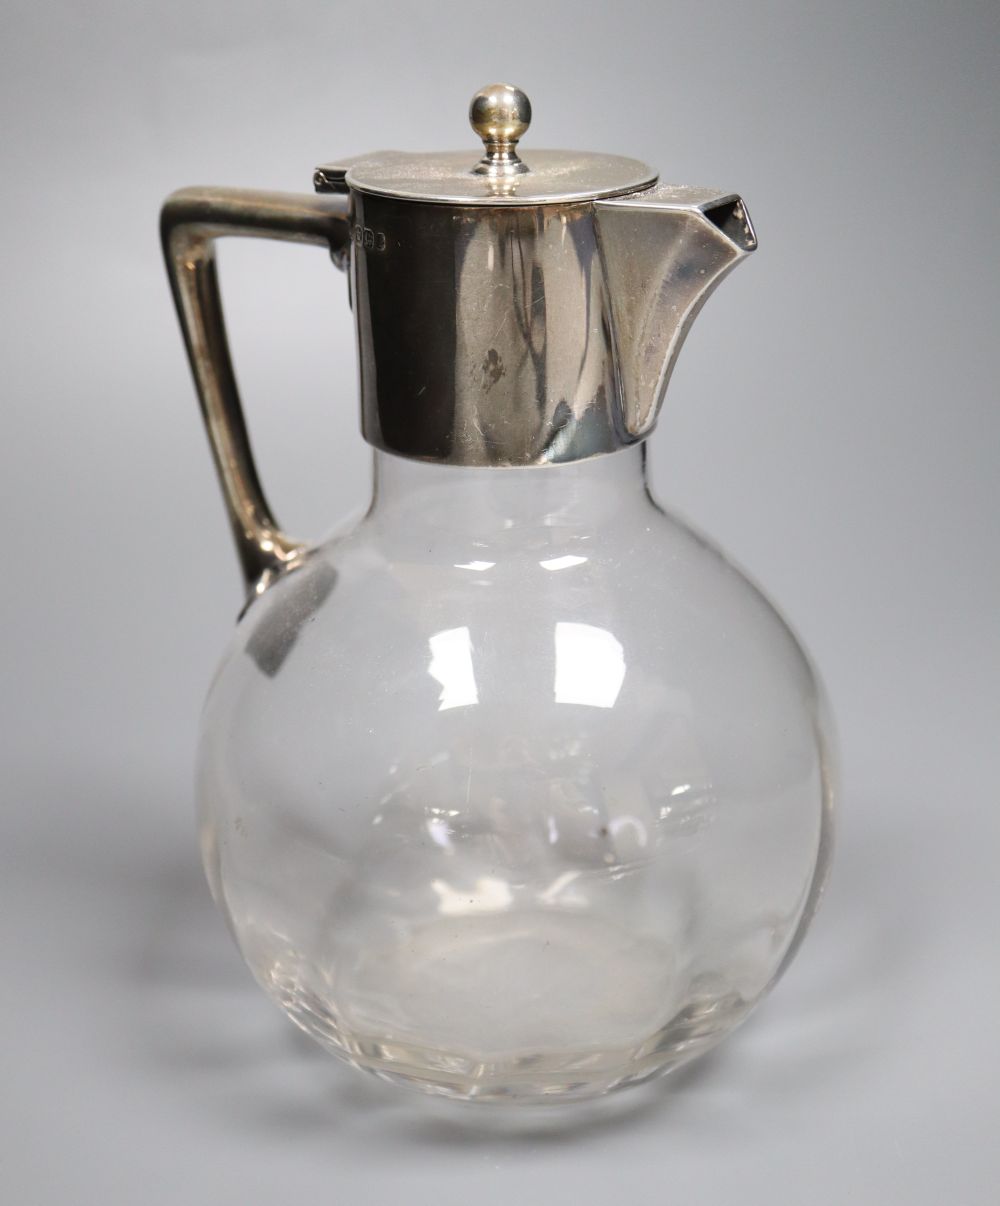 A late Victorian silver-mounted glass globular claret jug in the style of Christopher Dresser, Sheffield, 1897